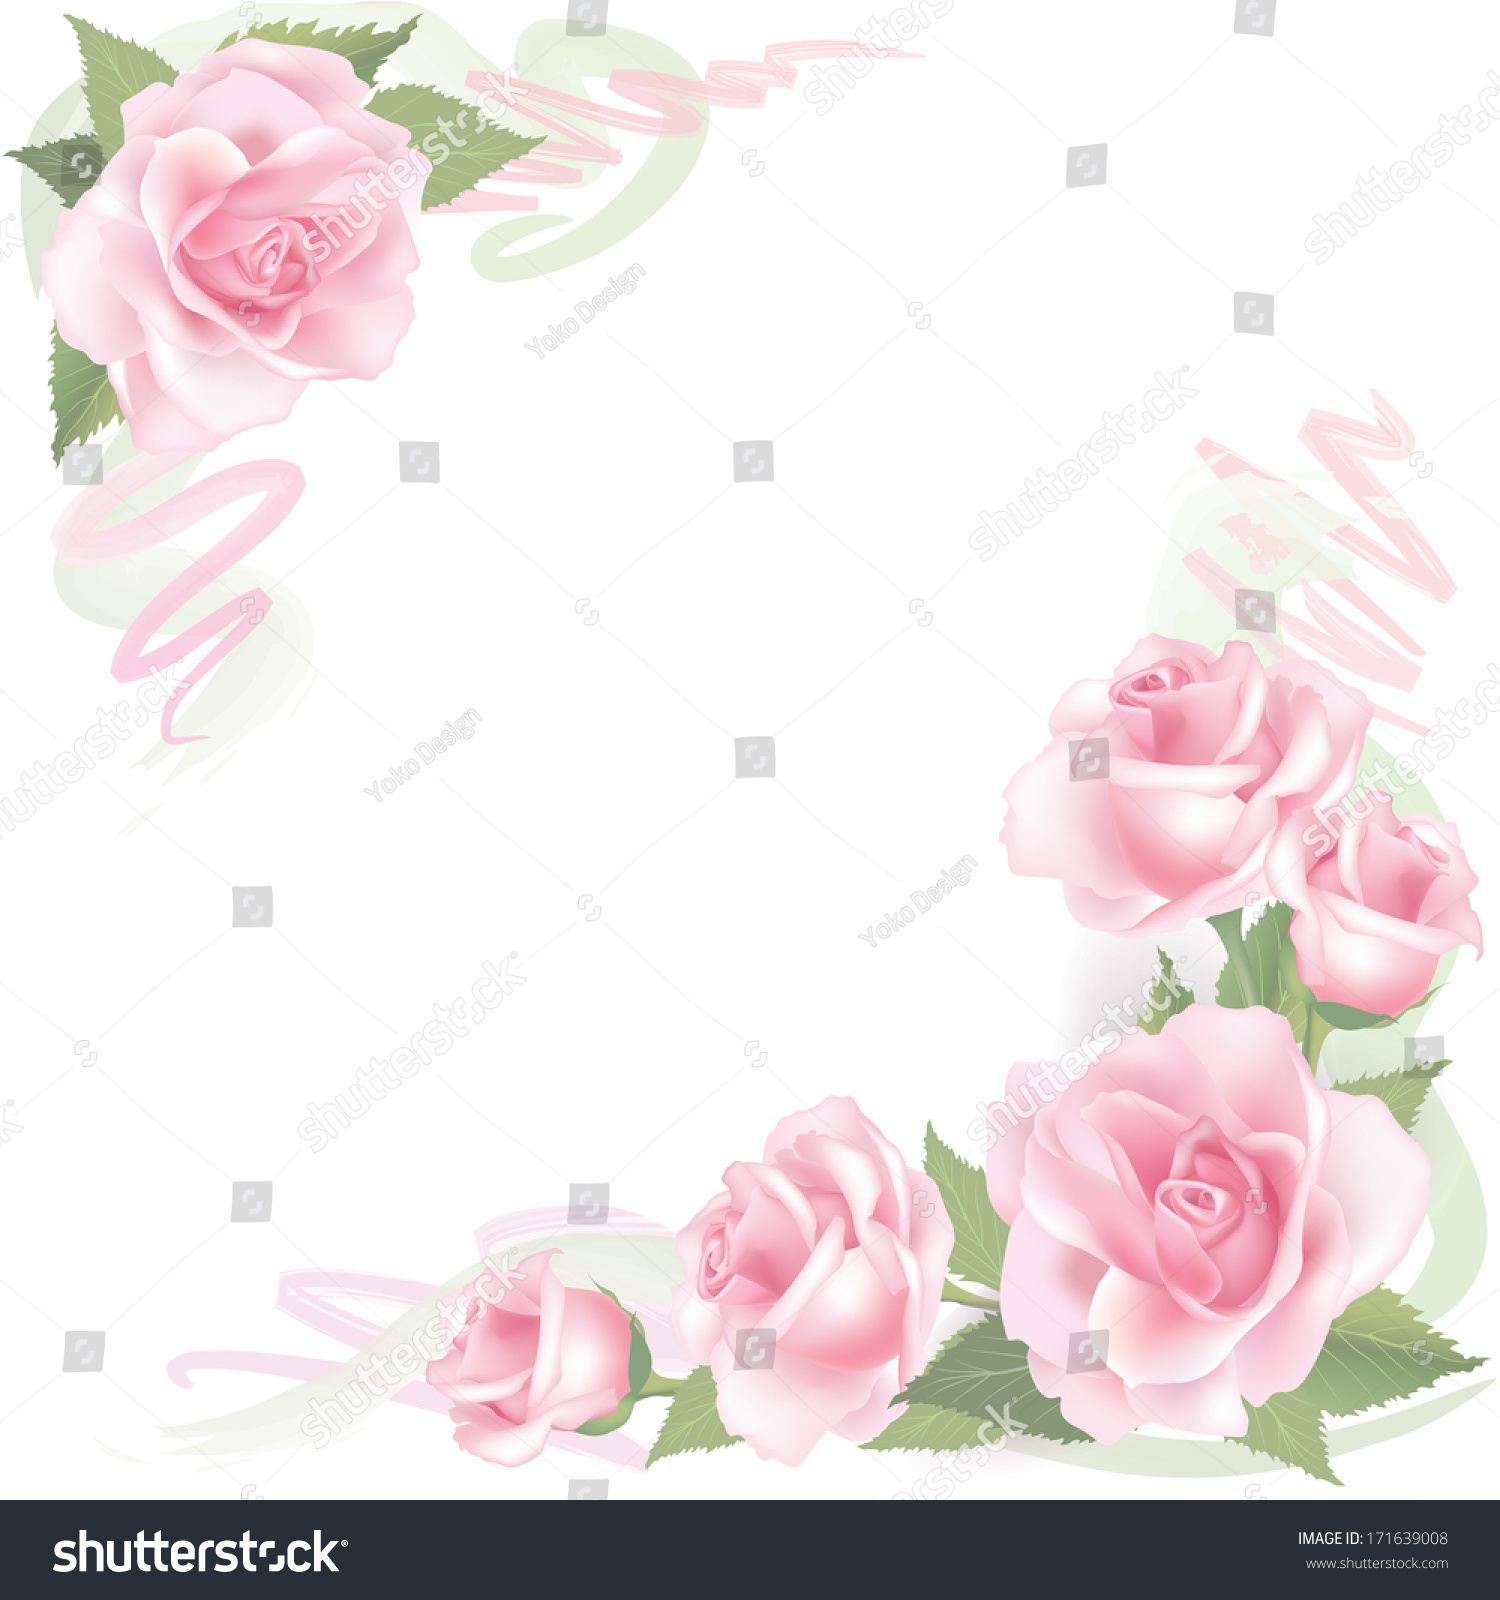 stock vector flower rose background floral frame with pink roses 171639008